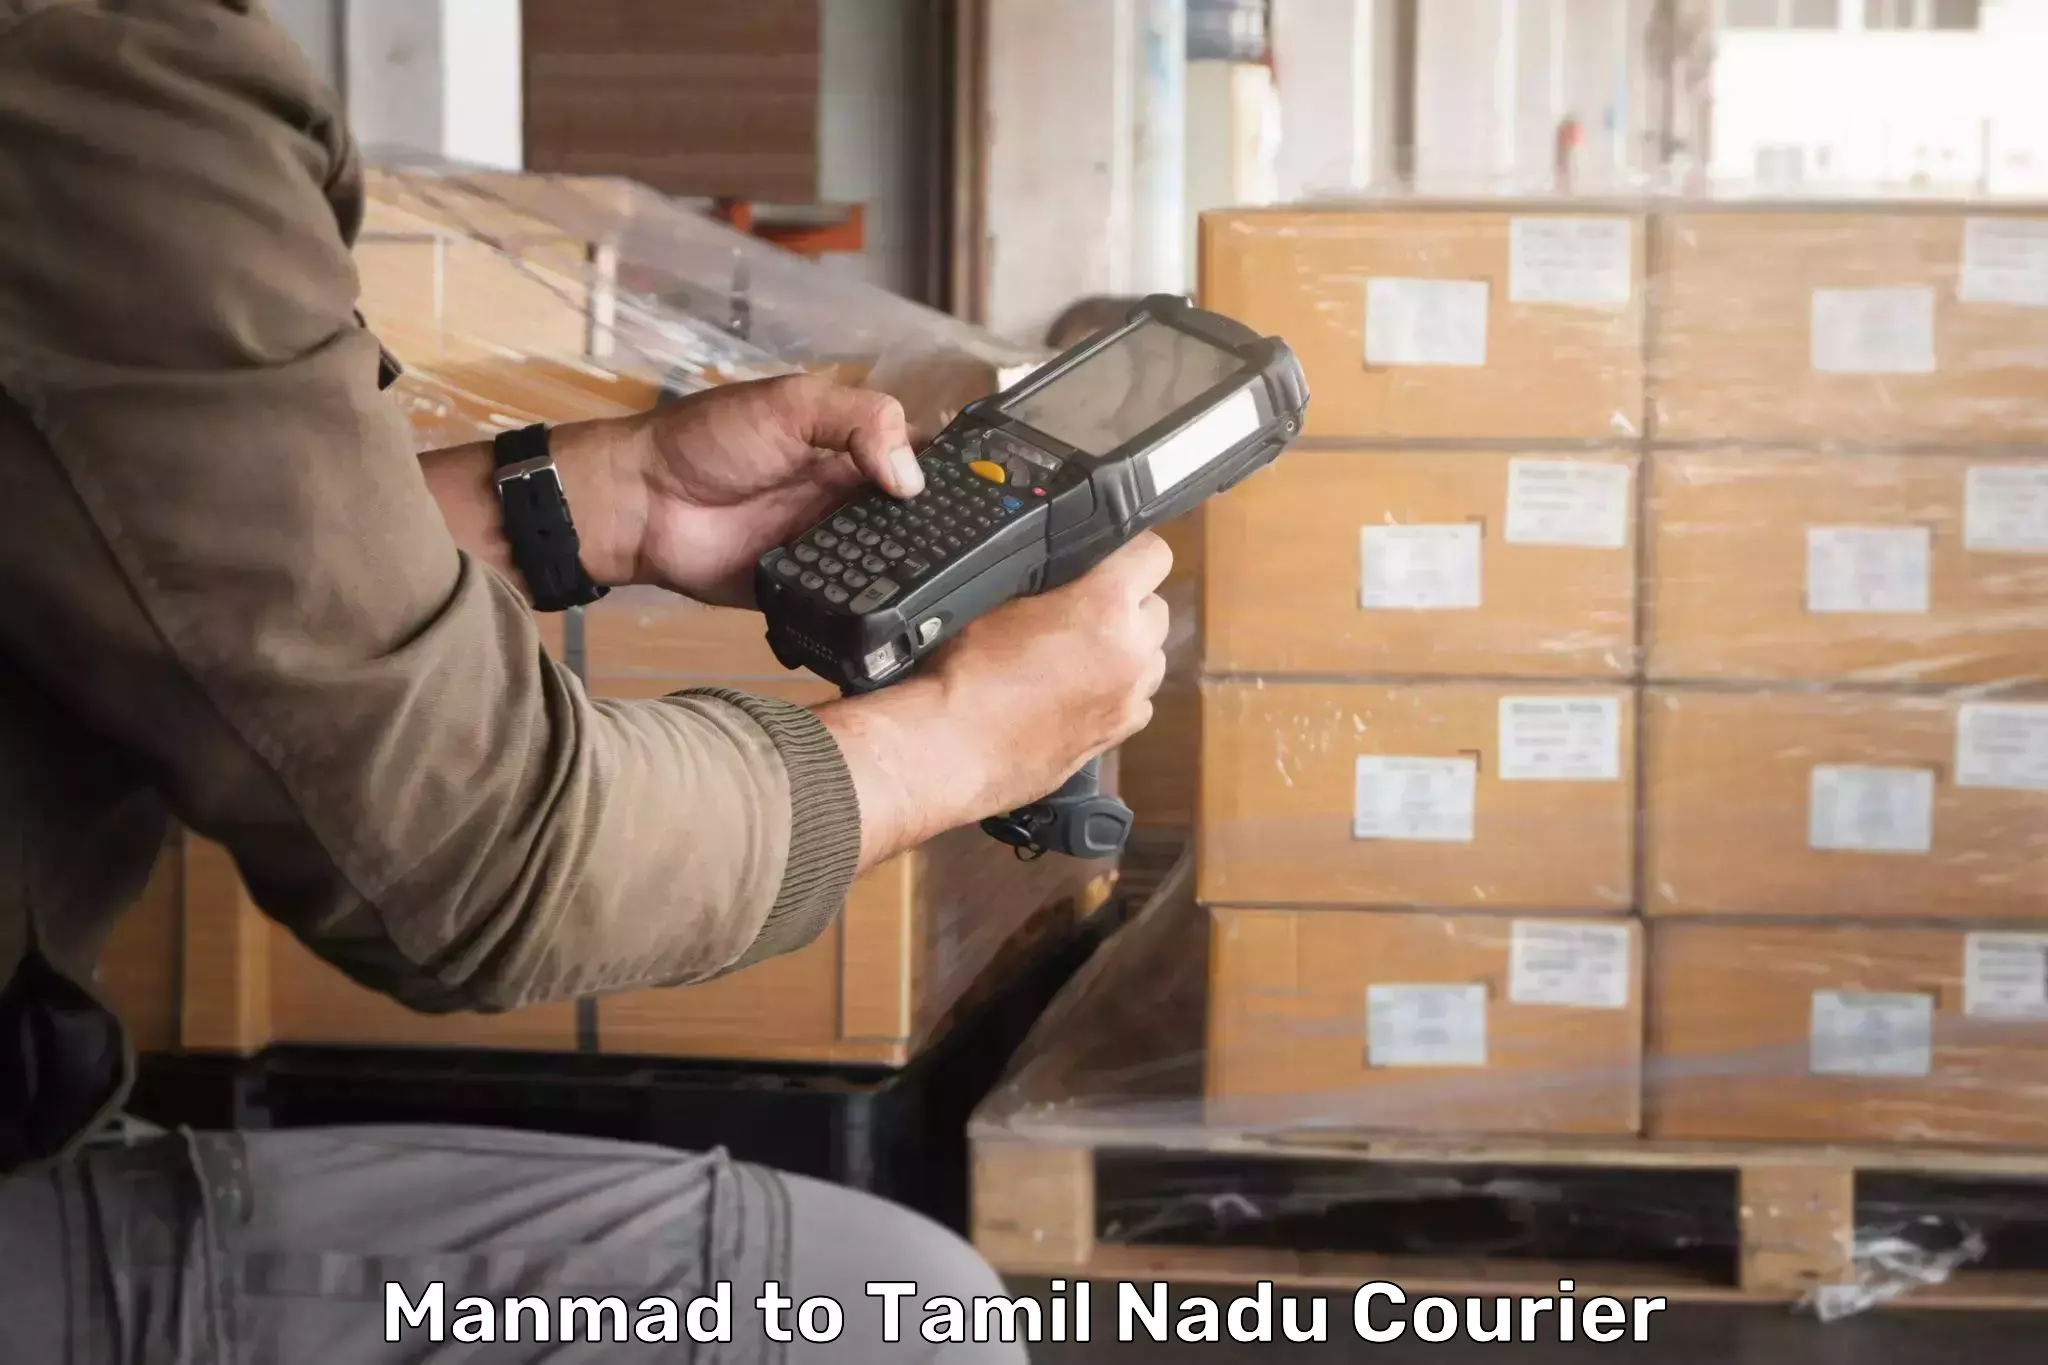 24/7 courier service in Manmad to Memalur